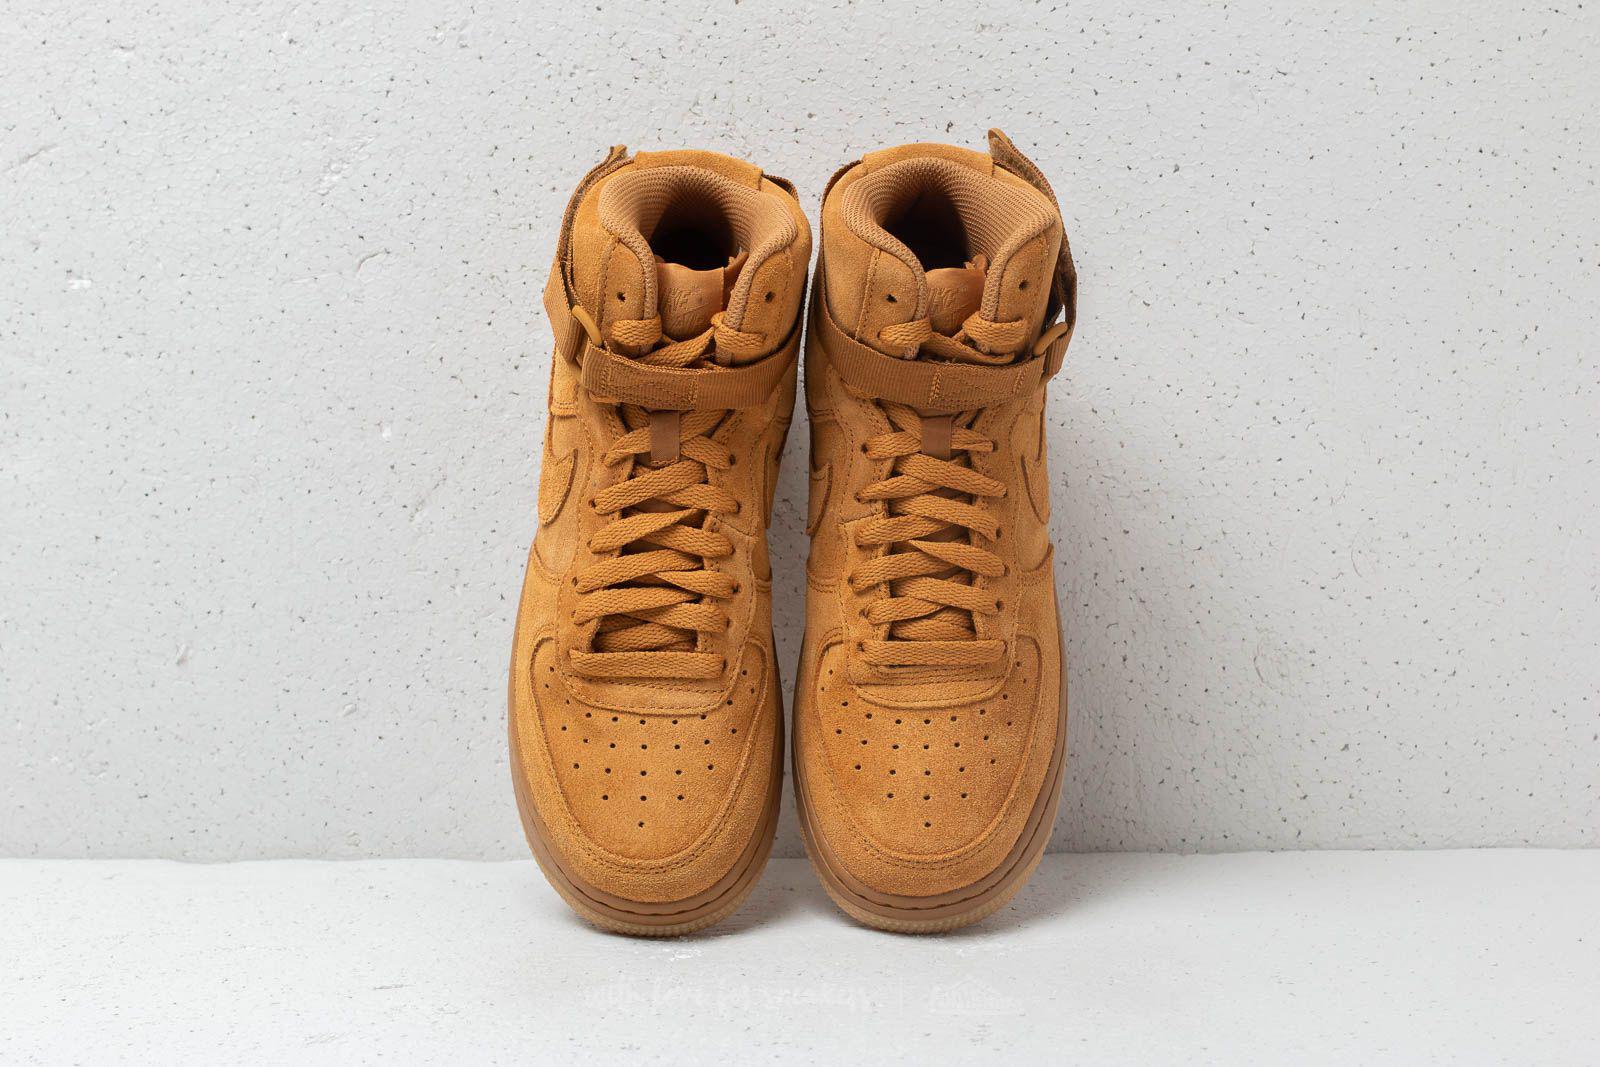 Nike New Wheat Air Force 1 LV8 3 GS Brown Size 8.5 - $96 - From